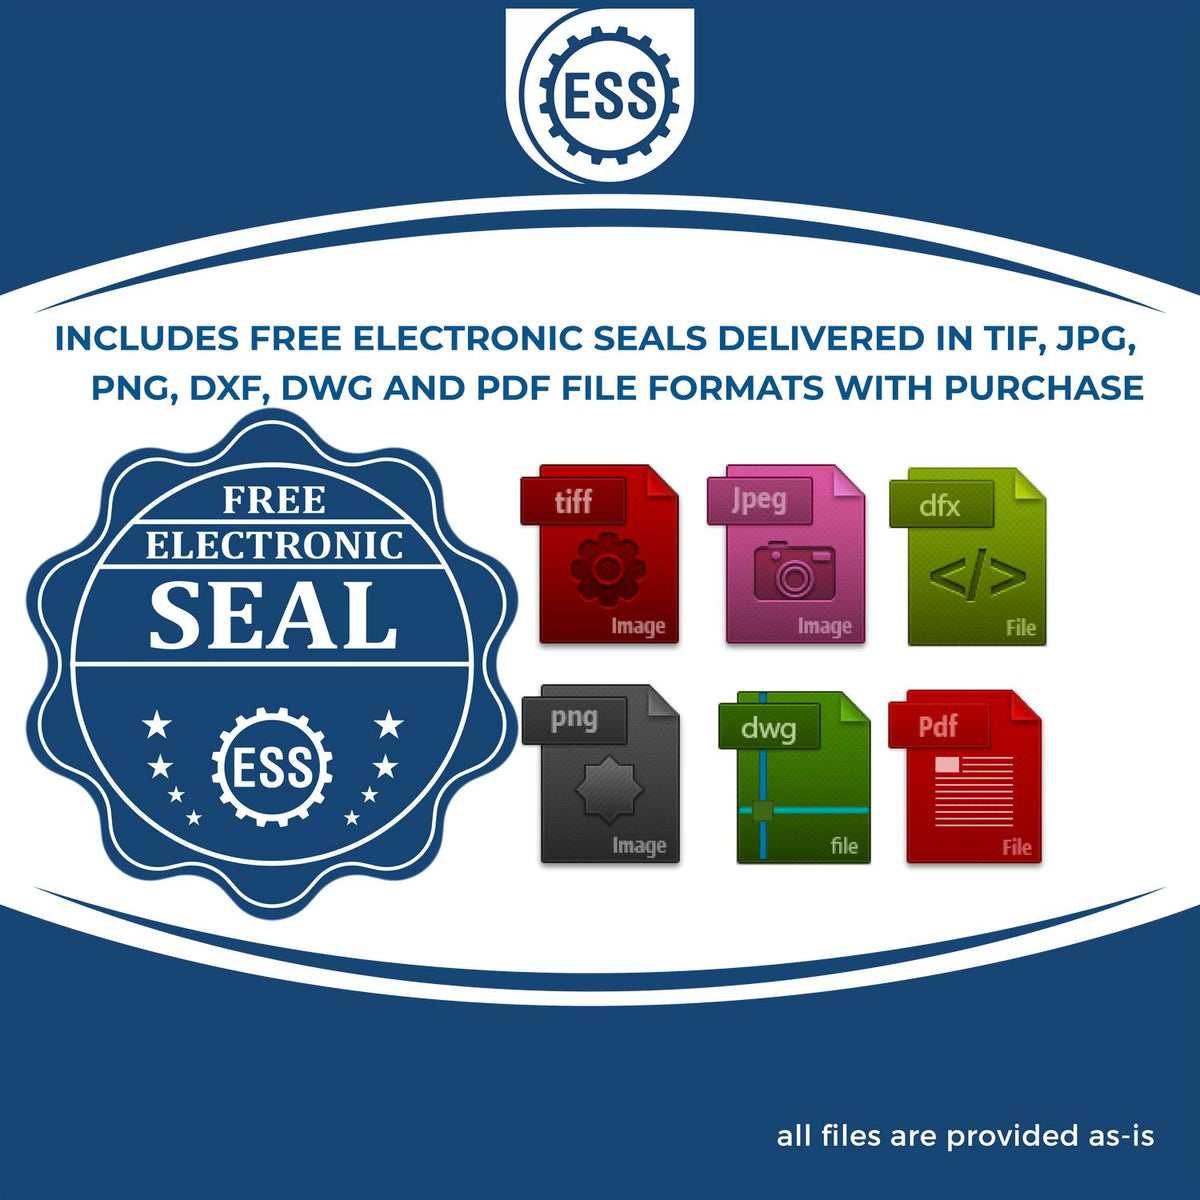 An infographic for the free electronic seal for the Gift Illinois Landscape Architect Seal illustrating the different file type icons such as DXF, DWG, TIF, JPG and PNG.